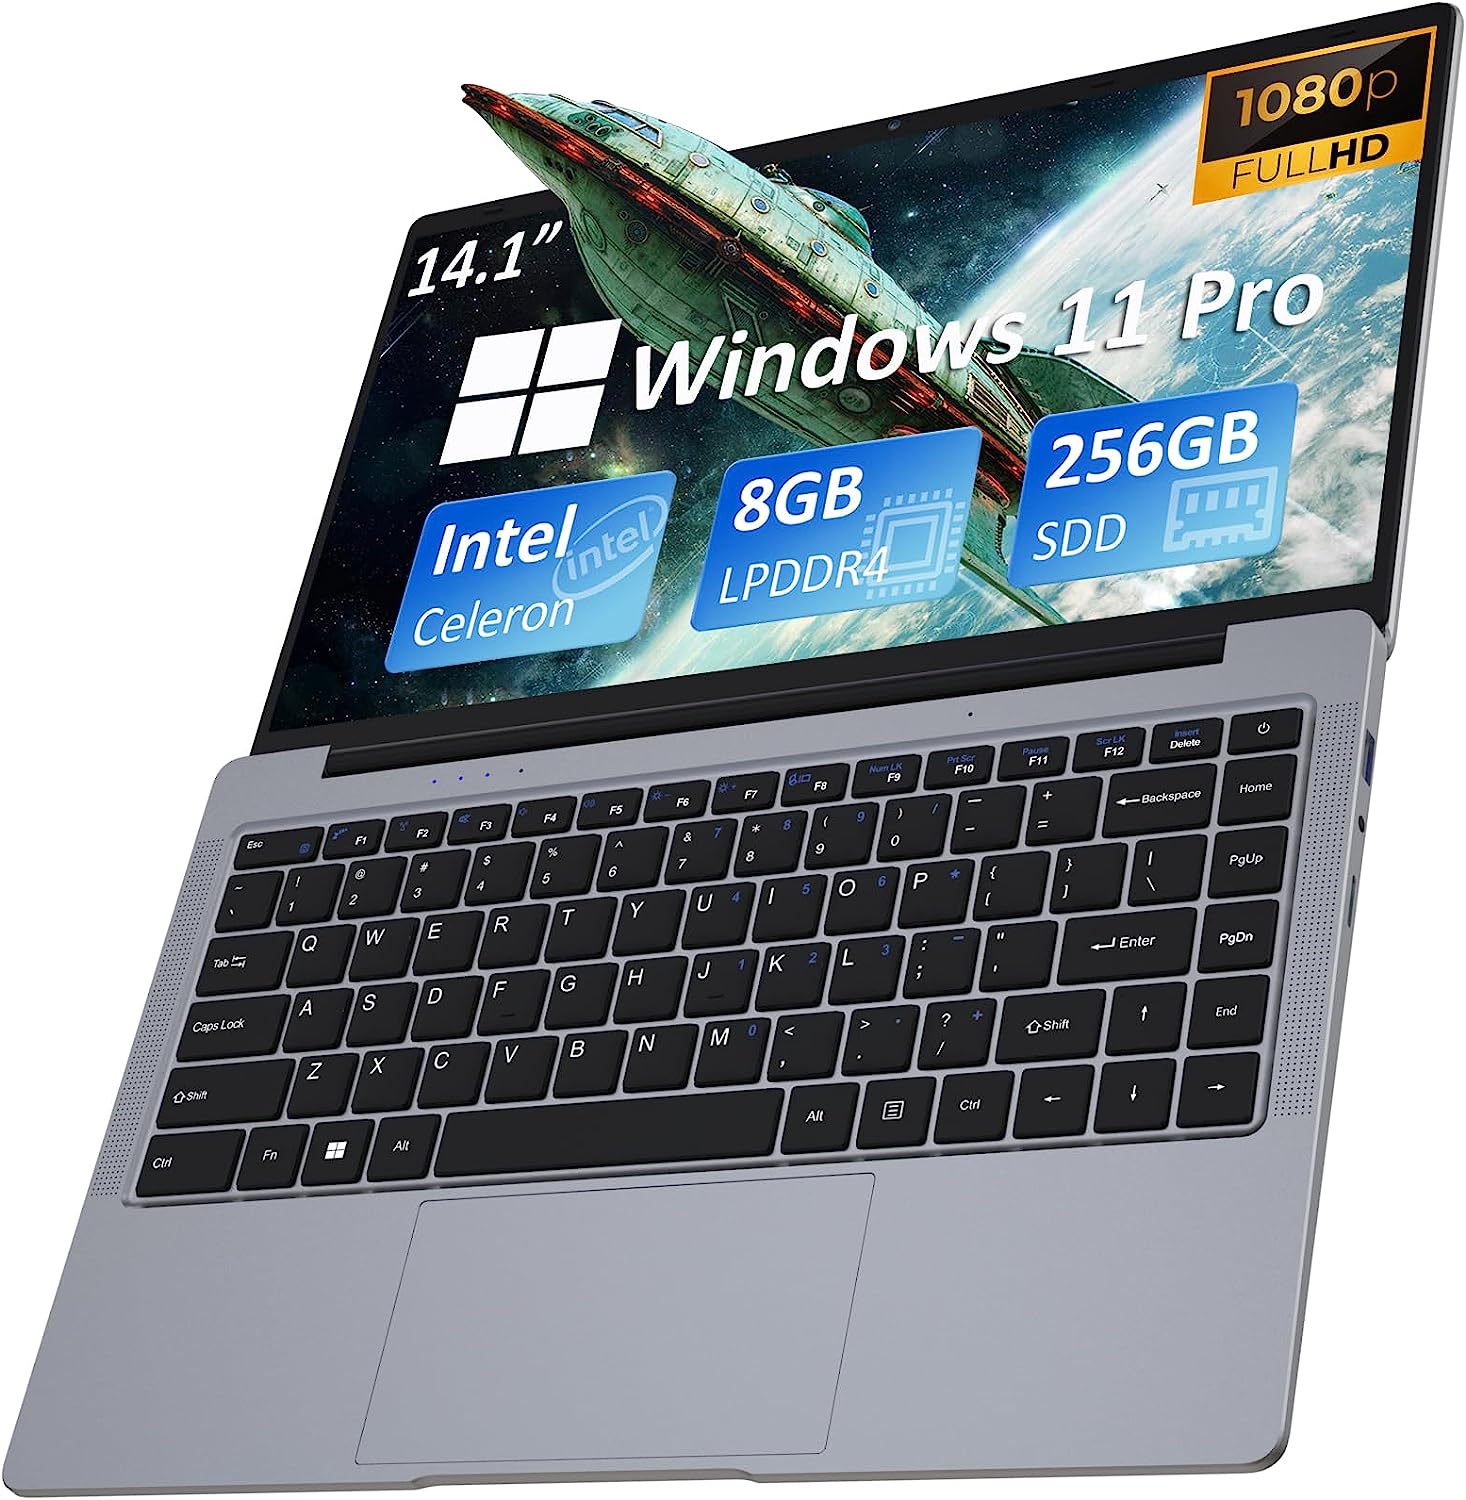 Auusda Laptop Computer with 8GB LPDDR4 256GB SSD, [...]